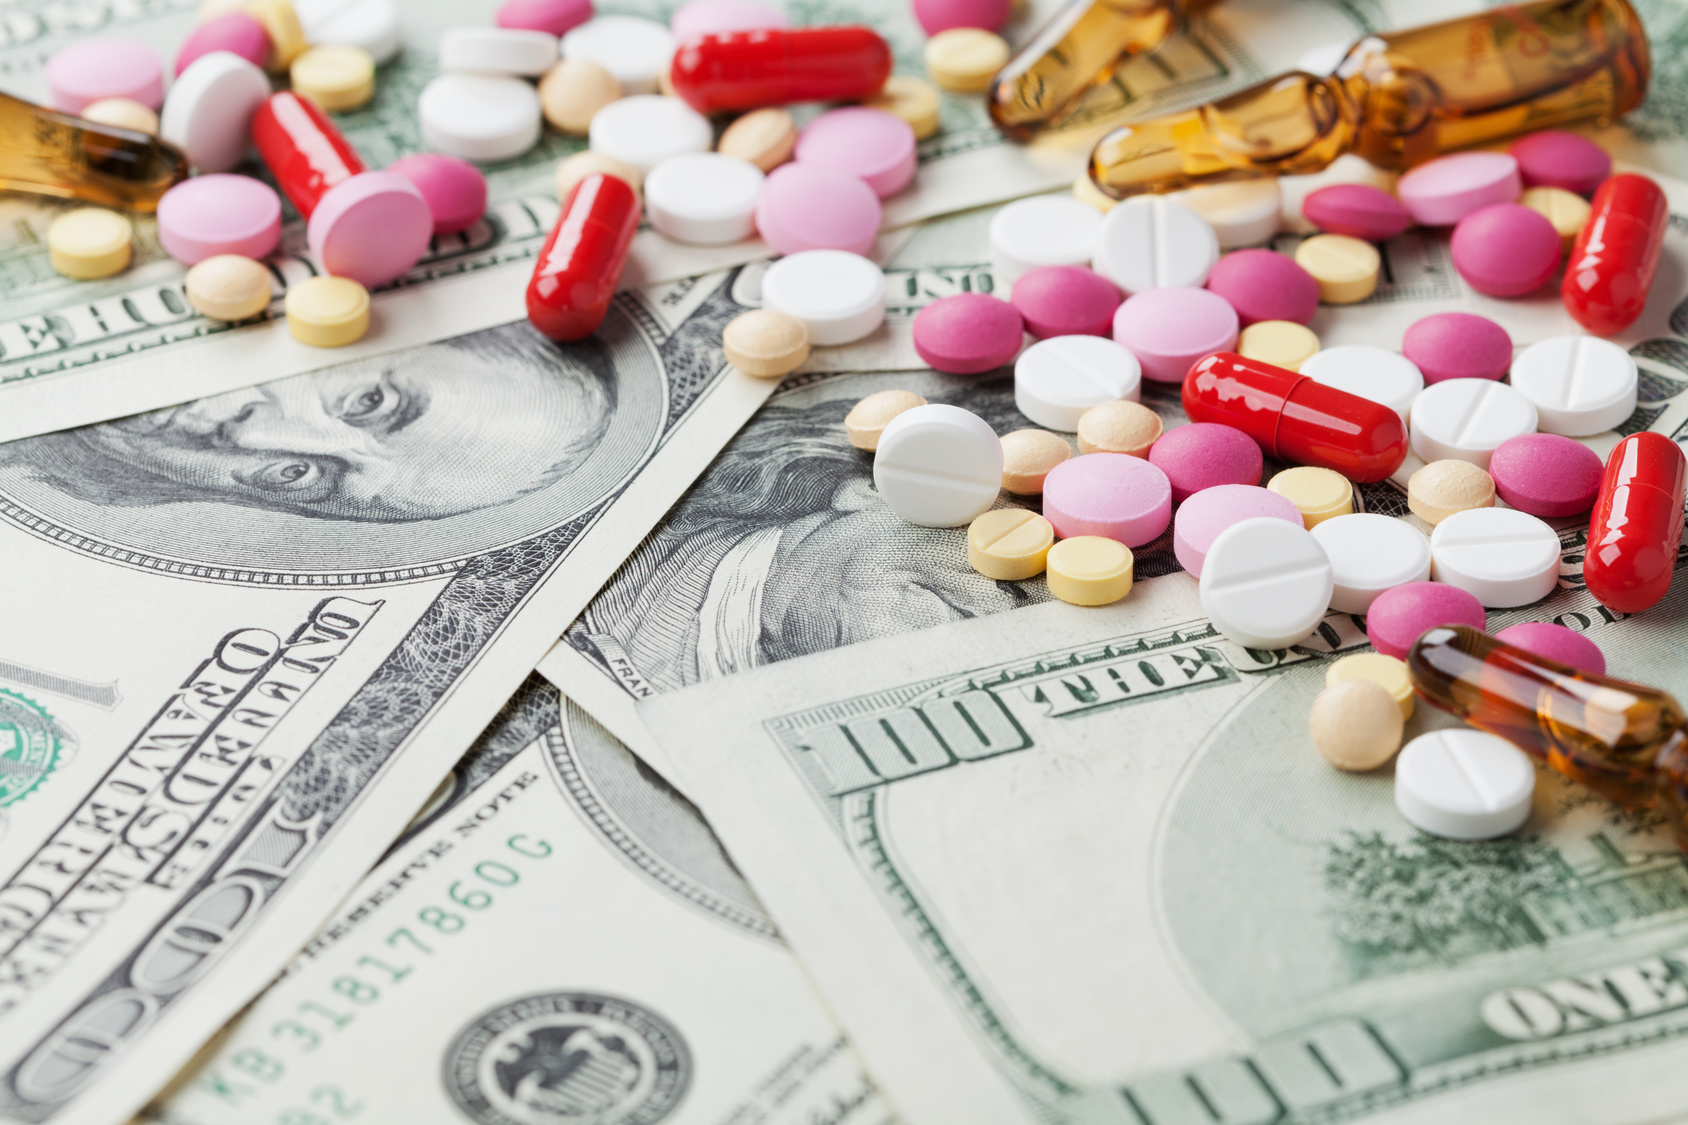 The World’s 10 Most Expensive Medications